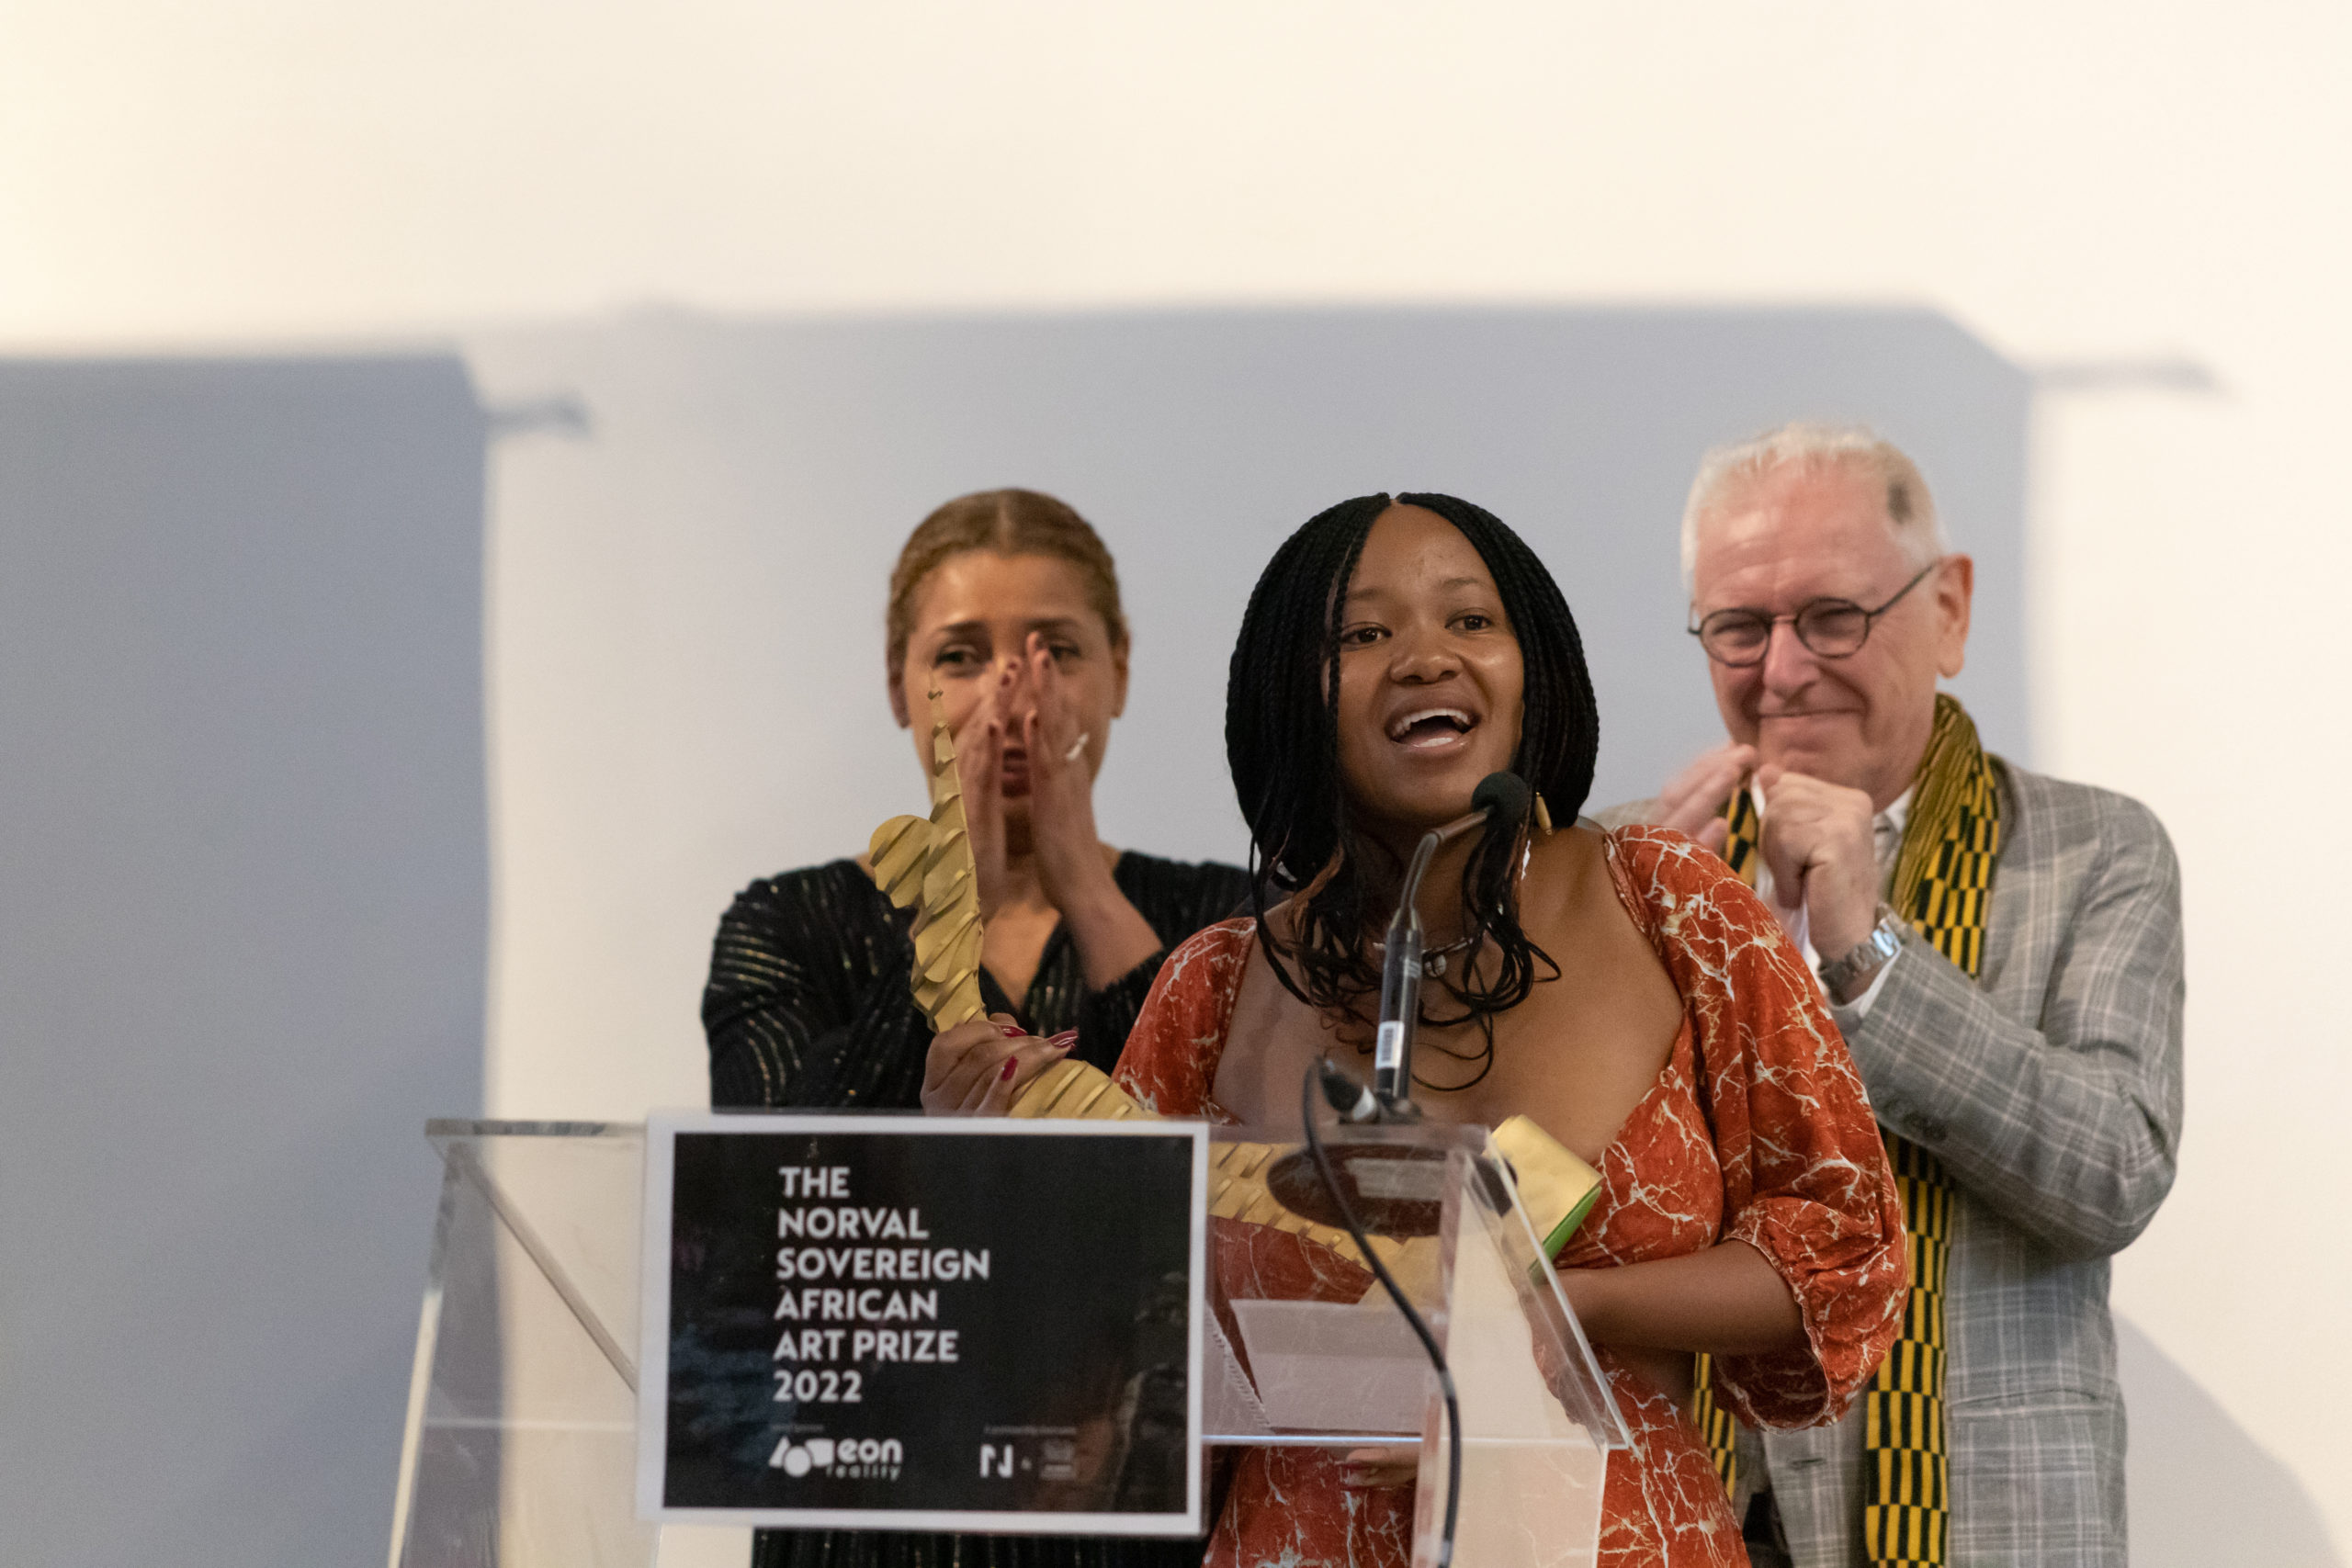 EON Reality Sponsors The Norval Sovereign African Art Prize, 2022